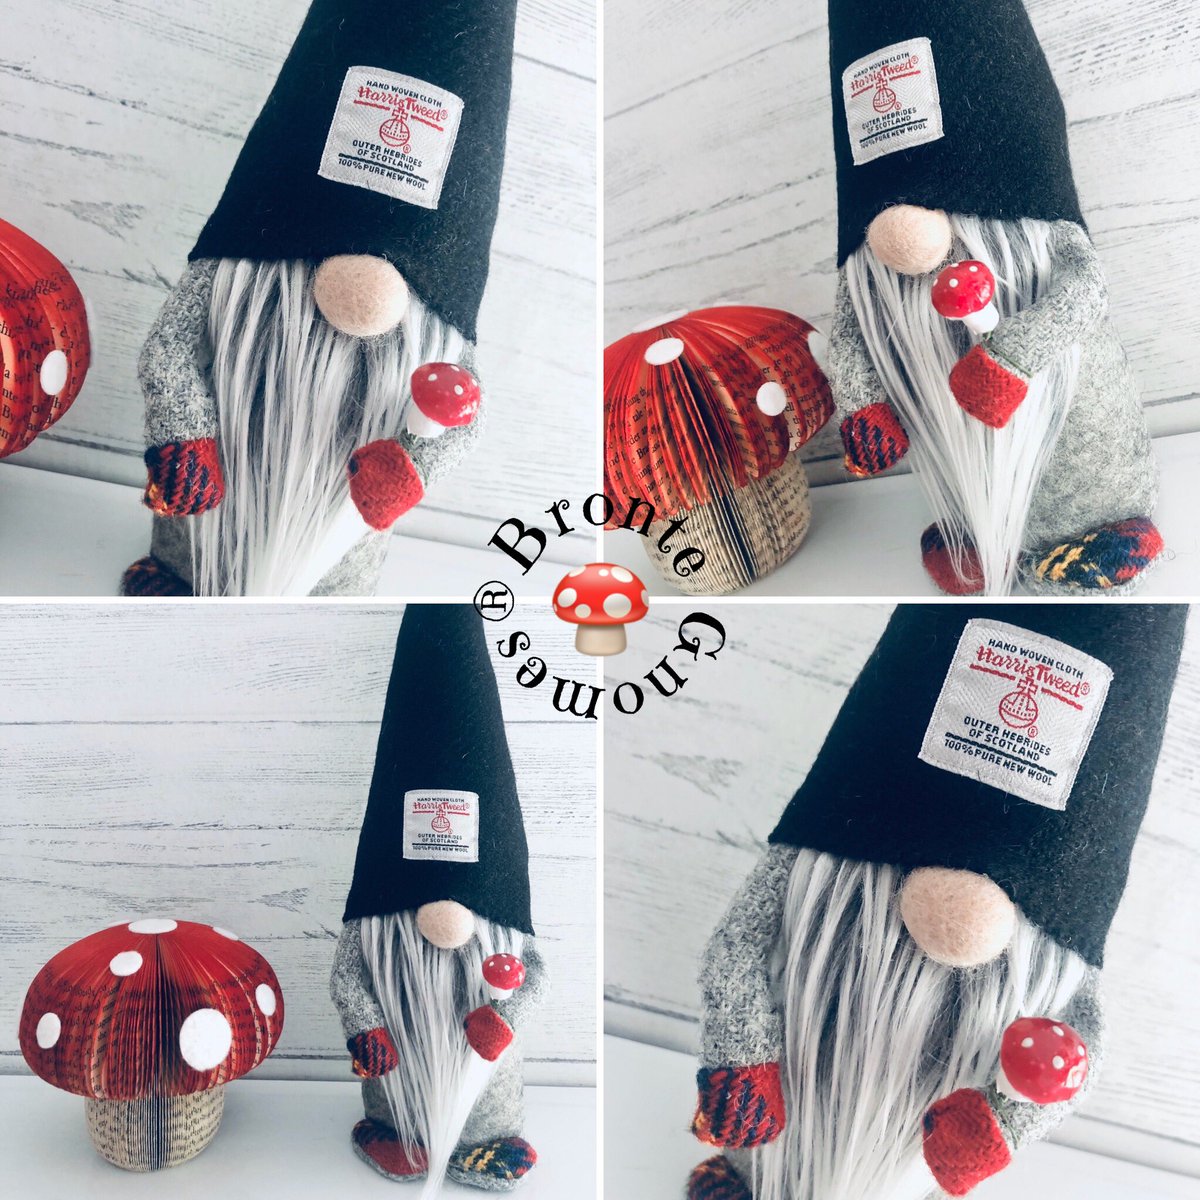 Check this little fungi out that I made today ♥️🍄♥️ . . #gnome #harristweed #toadstool #fungi #handmade #StayHomeSaveLives